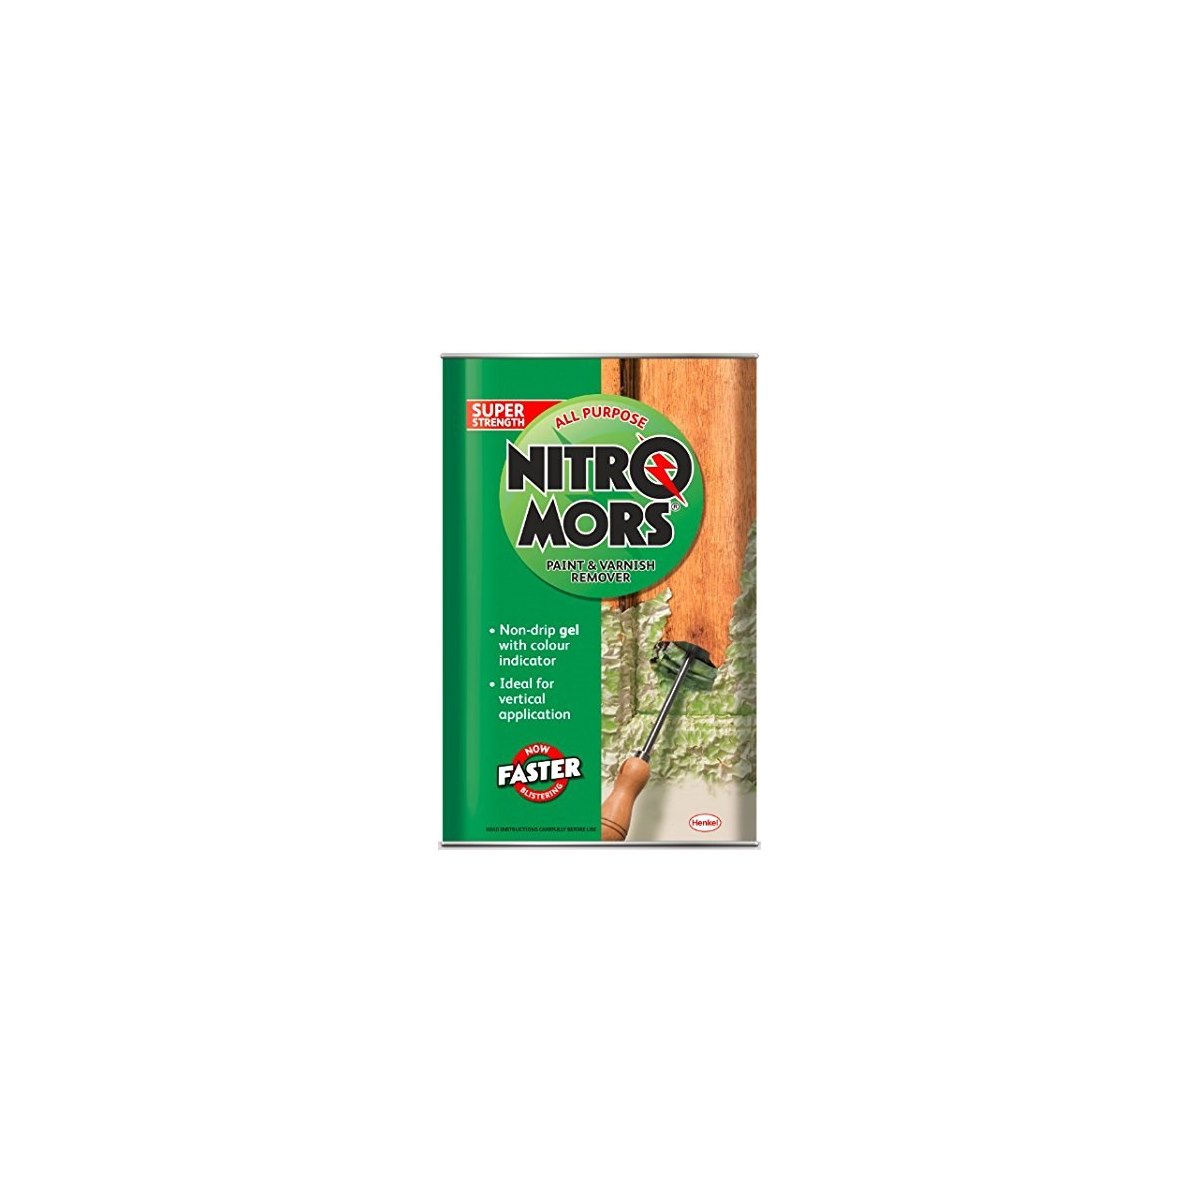 NitroMors All Purpose Paint and Varnish Remover 4 Litre